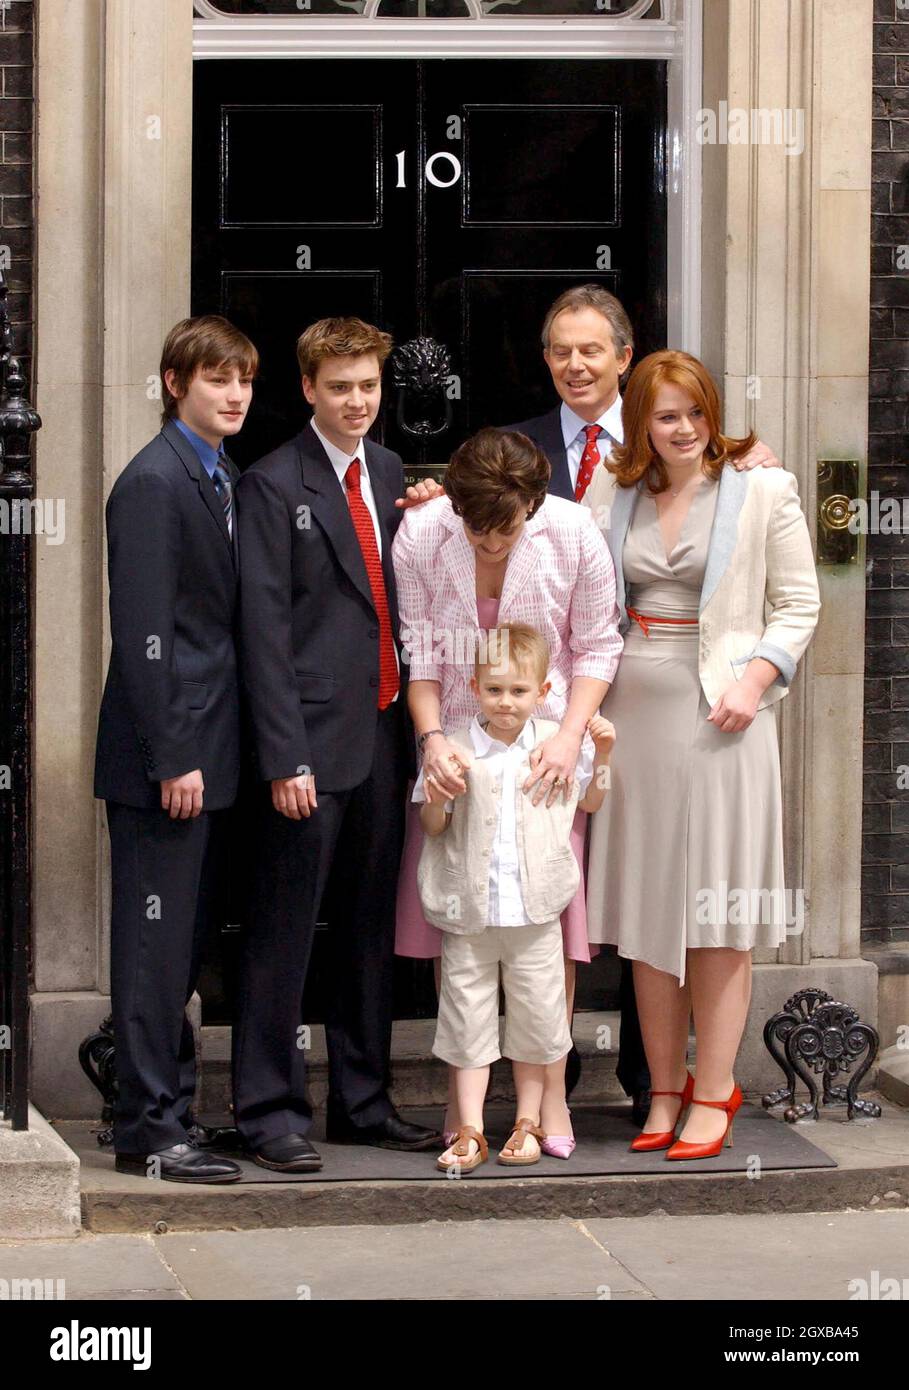 Tony Blair, Cherie Blair and children Euan, Nicky, Kathryn and Leo at on the day the Labour Party was re-elected to govern the UK. Stock Photo